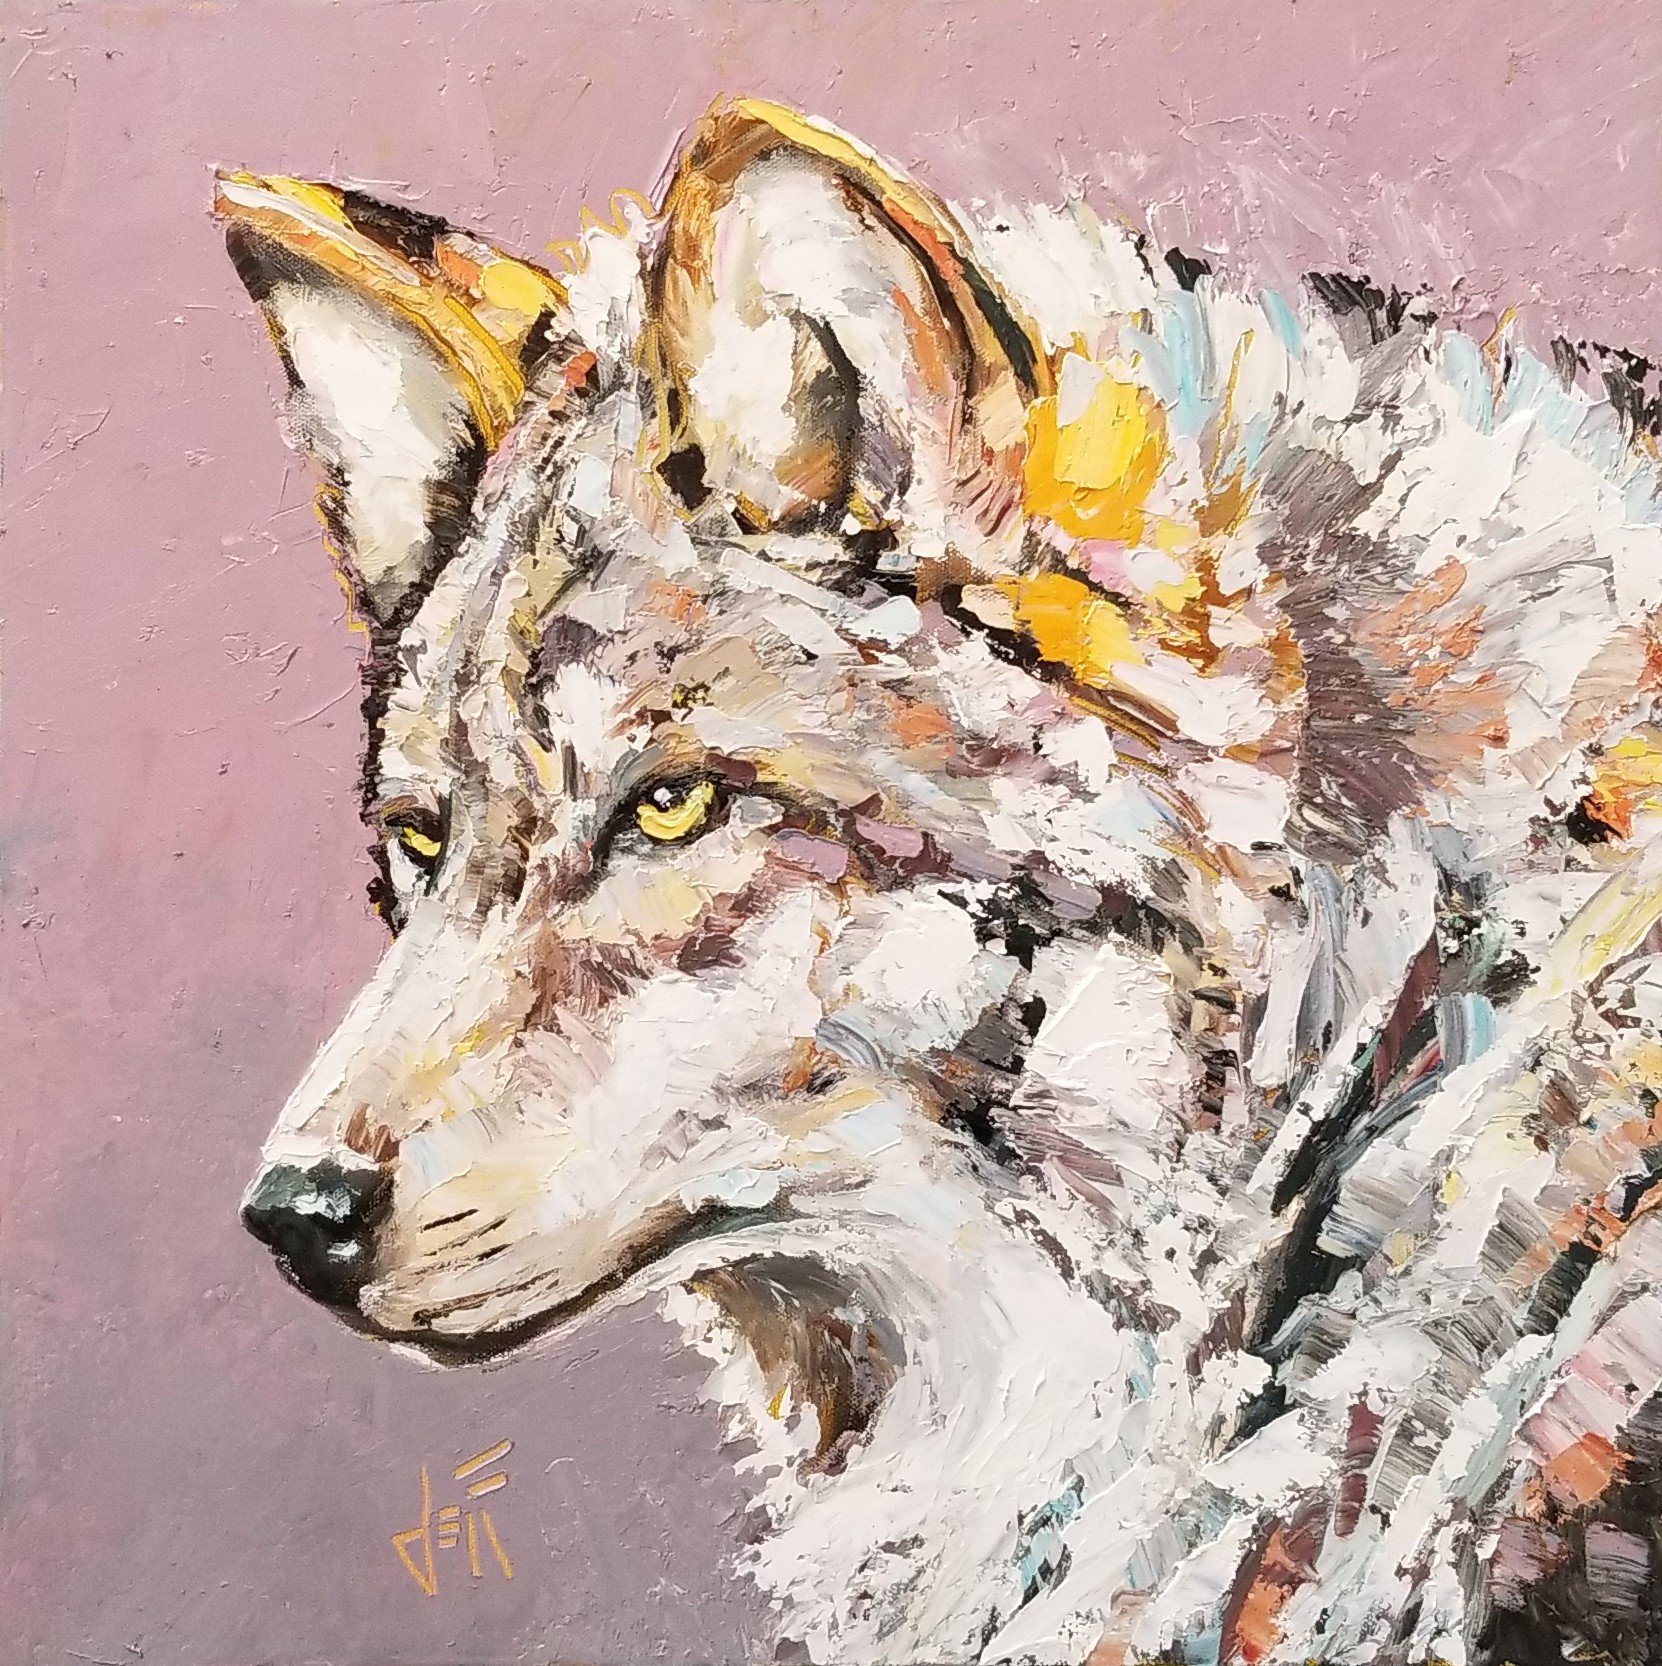  Hungry Like The Wolf-oil on canvas 20” x 20”   Sivertson Gallery 